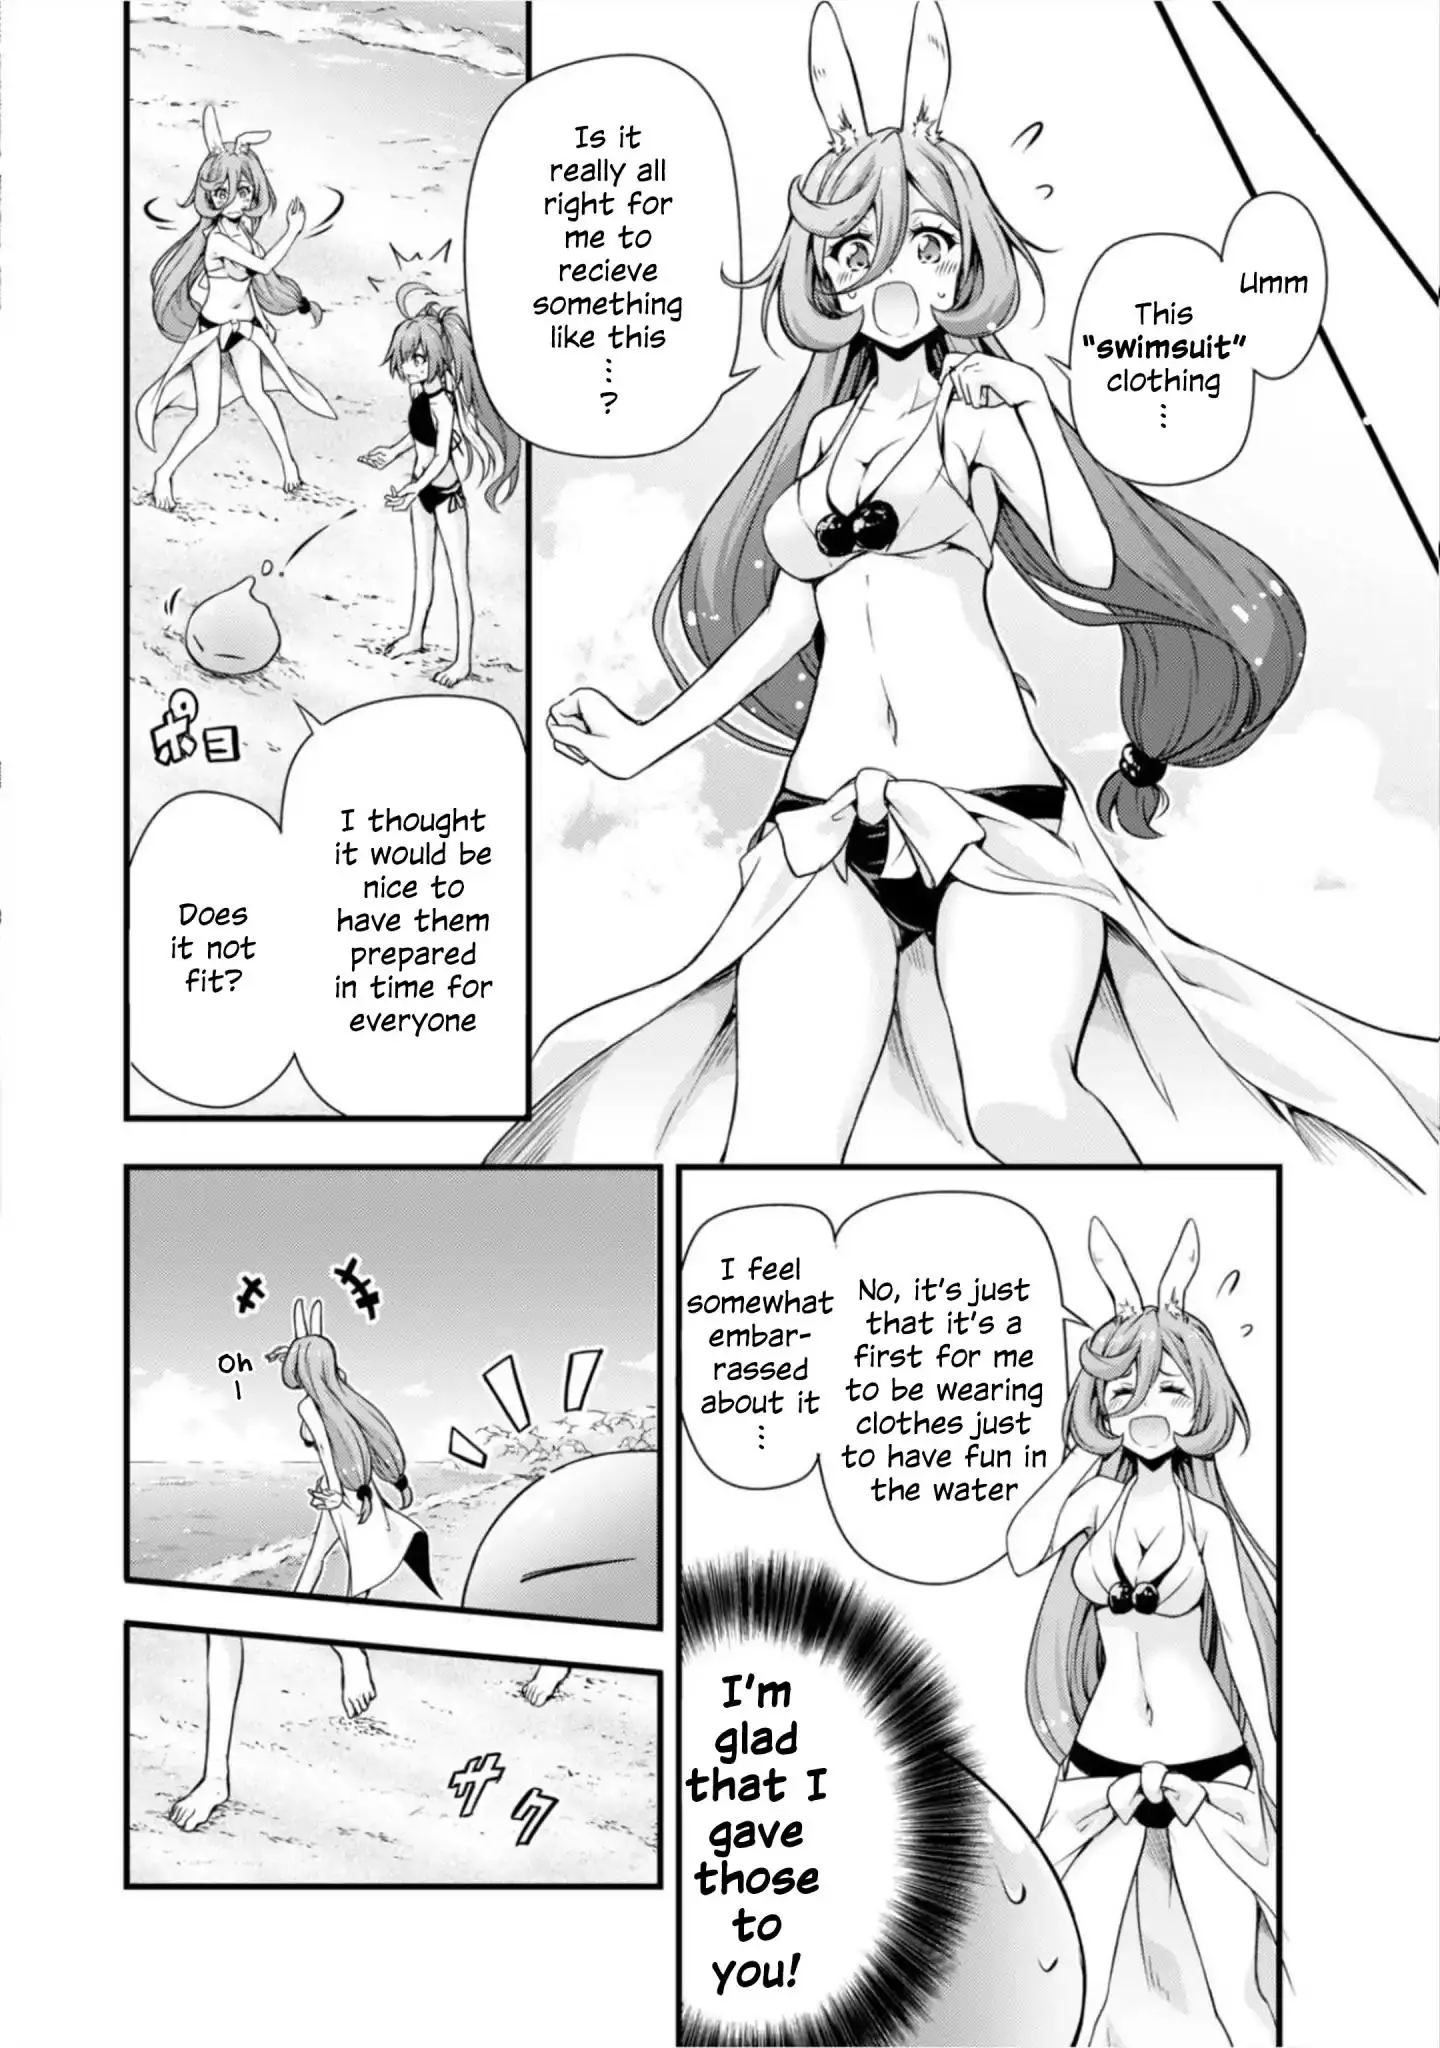 Tensei Shitara Slime Datta Ken: The Ways of Strolling in the Demon Country - 23 page 5